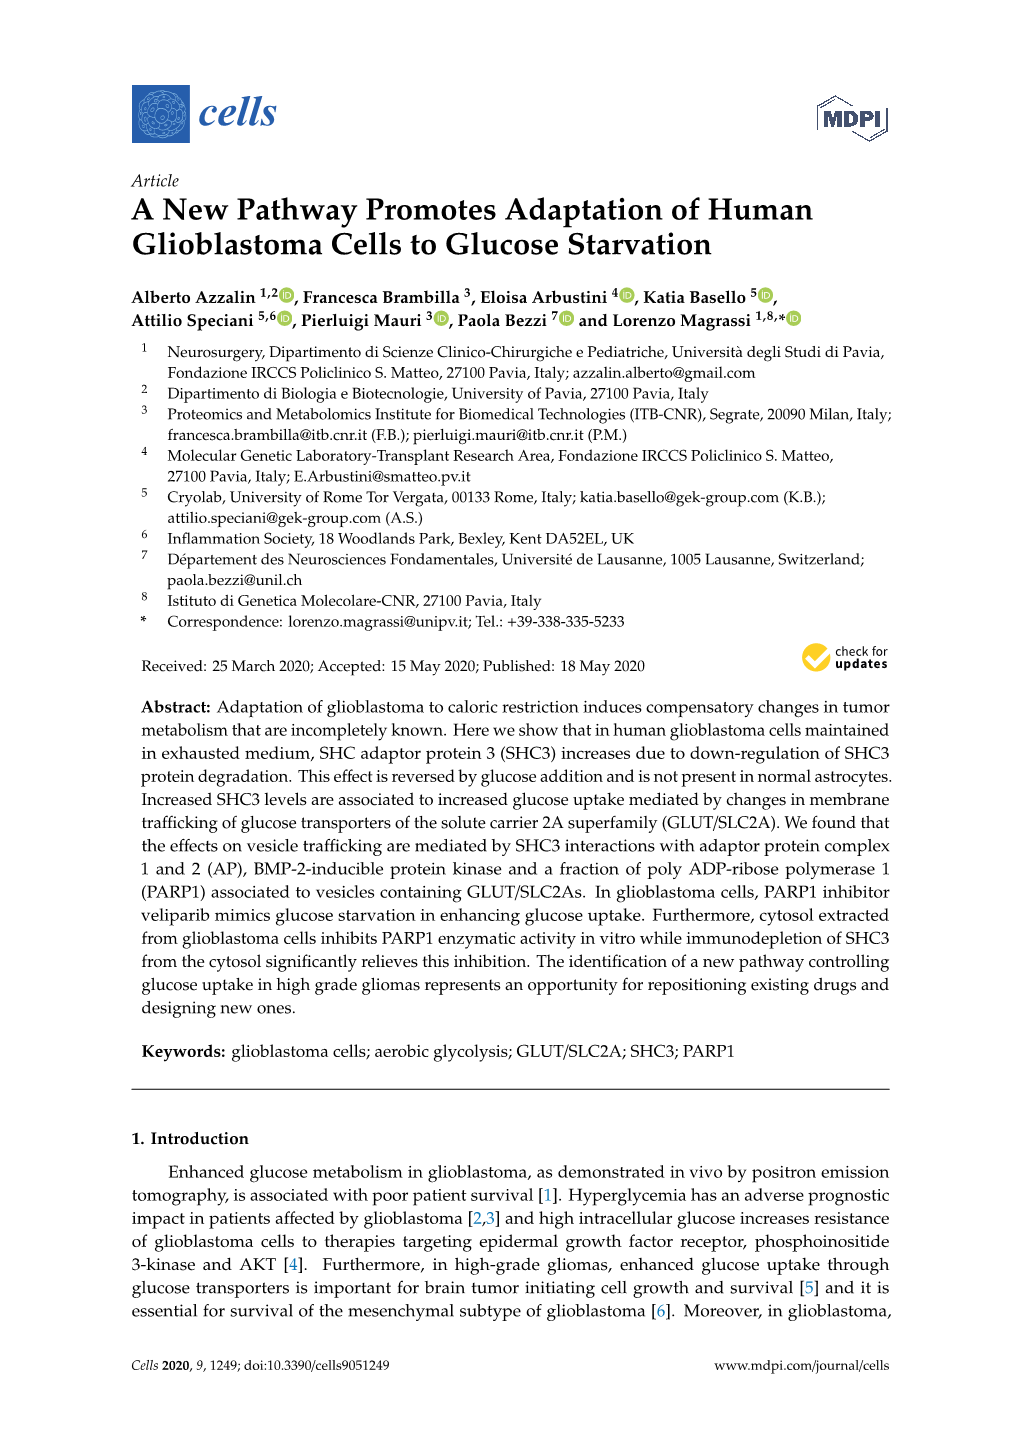 A New Pathway Promotes Adaptation of Human Glioblastoma Cells to Glucose Starvation